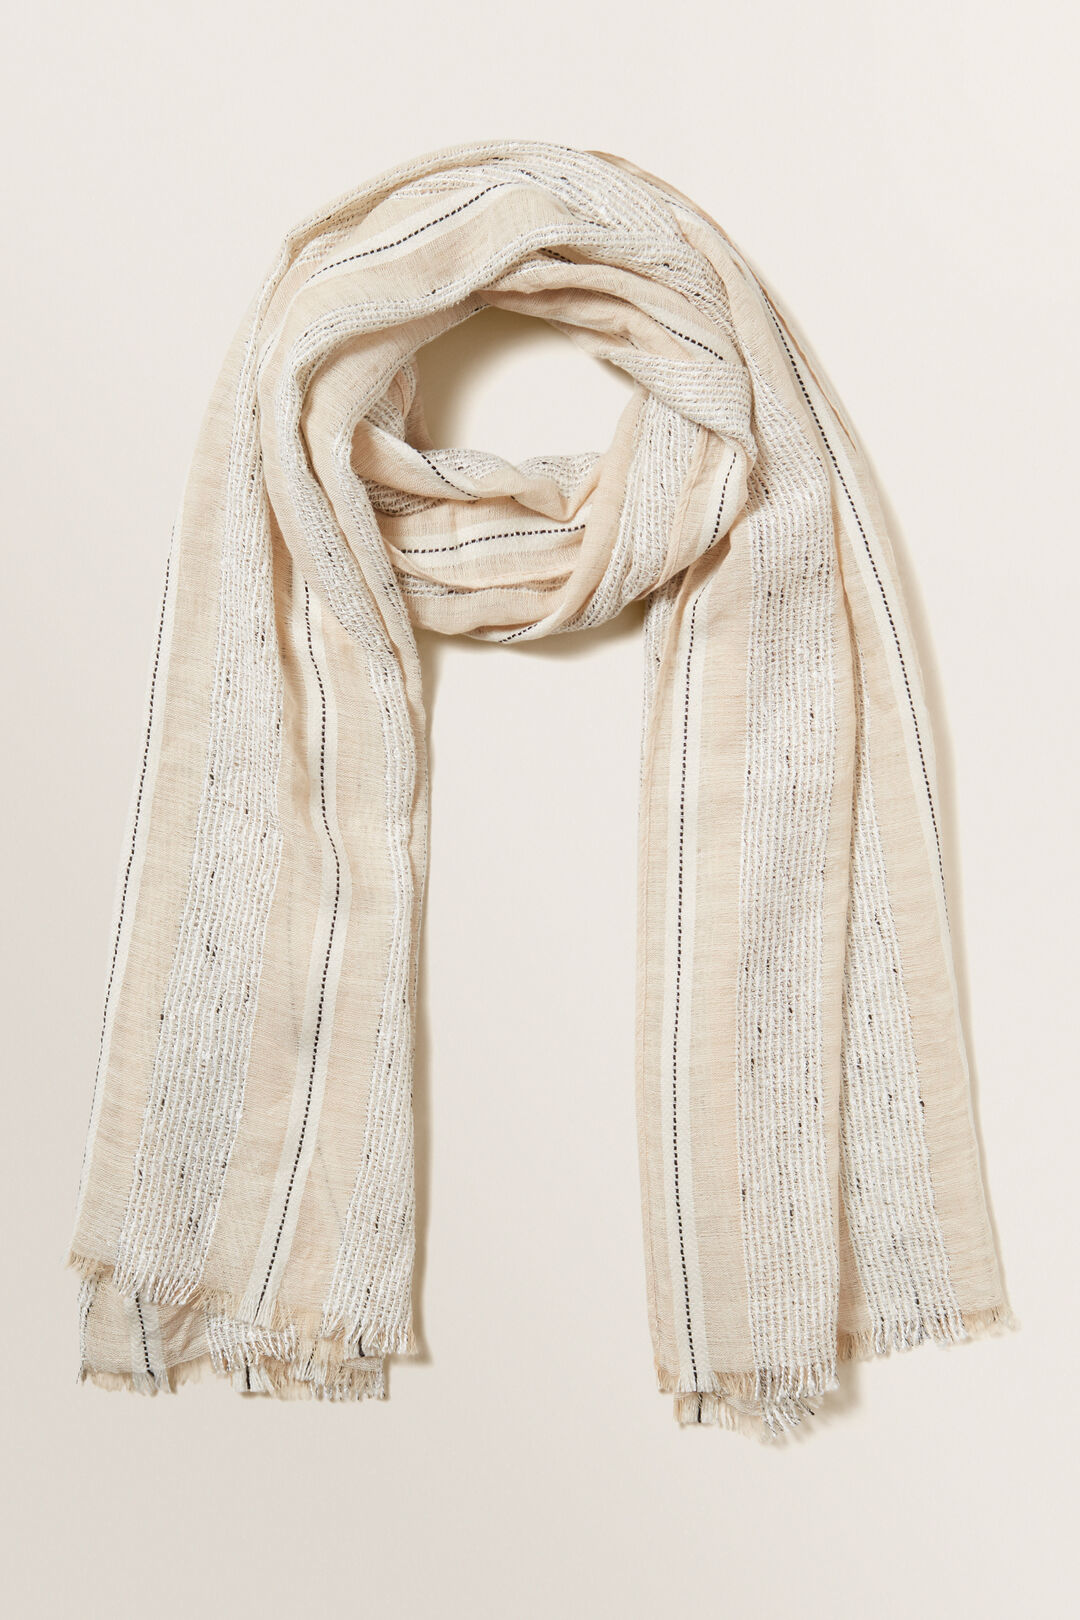 Textured Weave Scarf  Neutral Sand Multi  hi-res